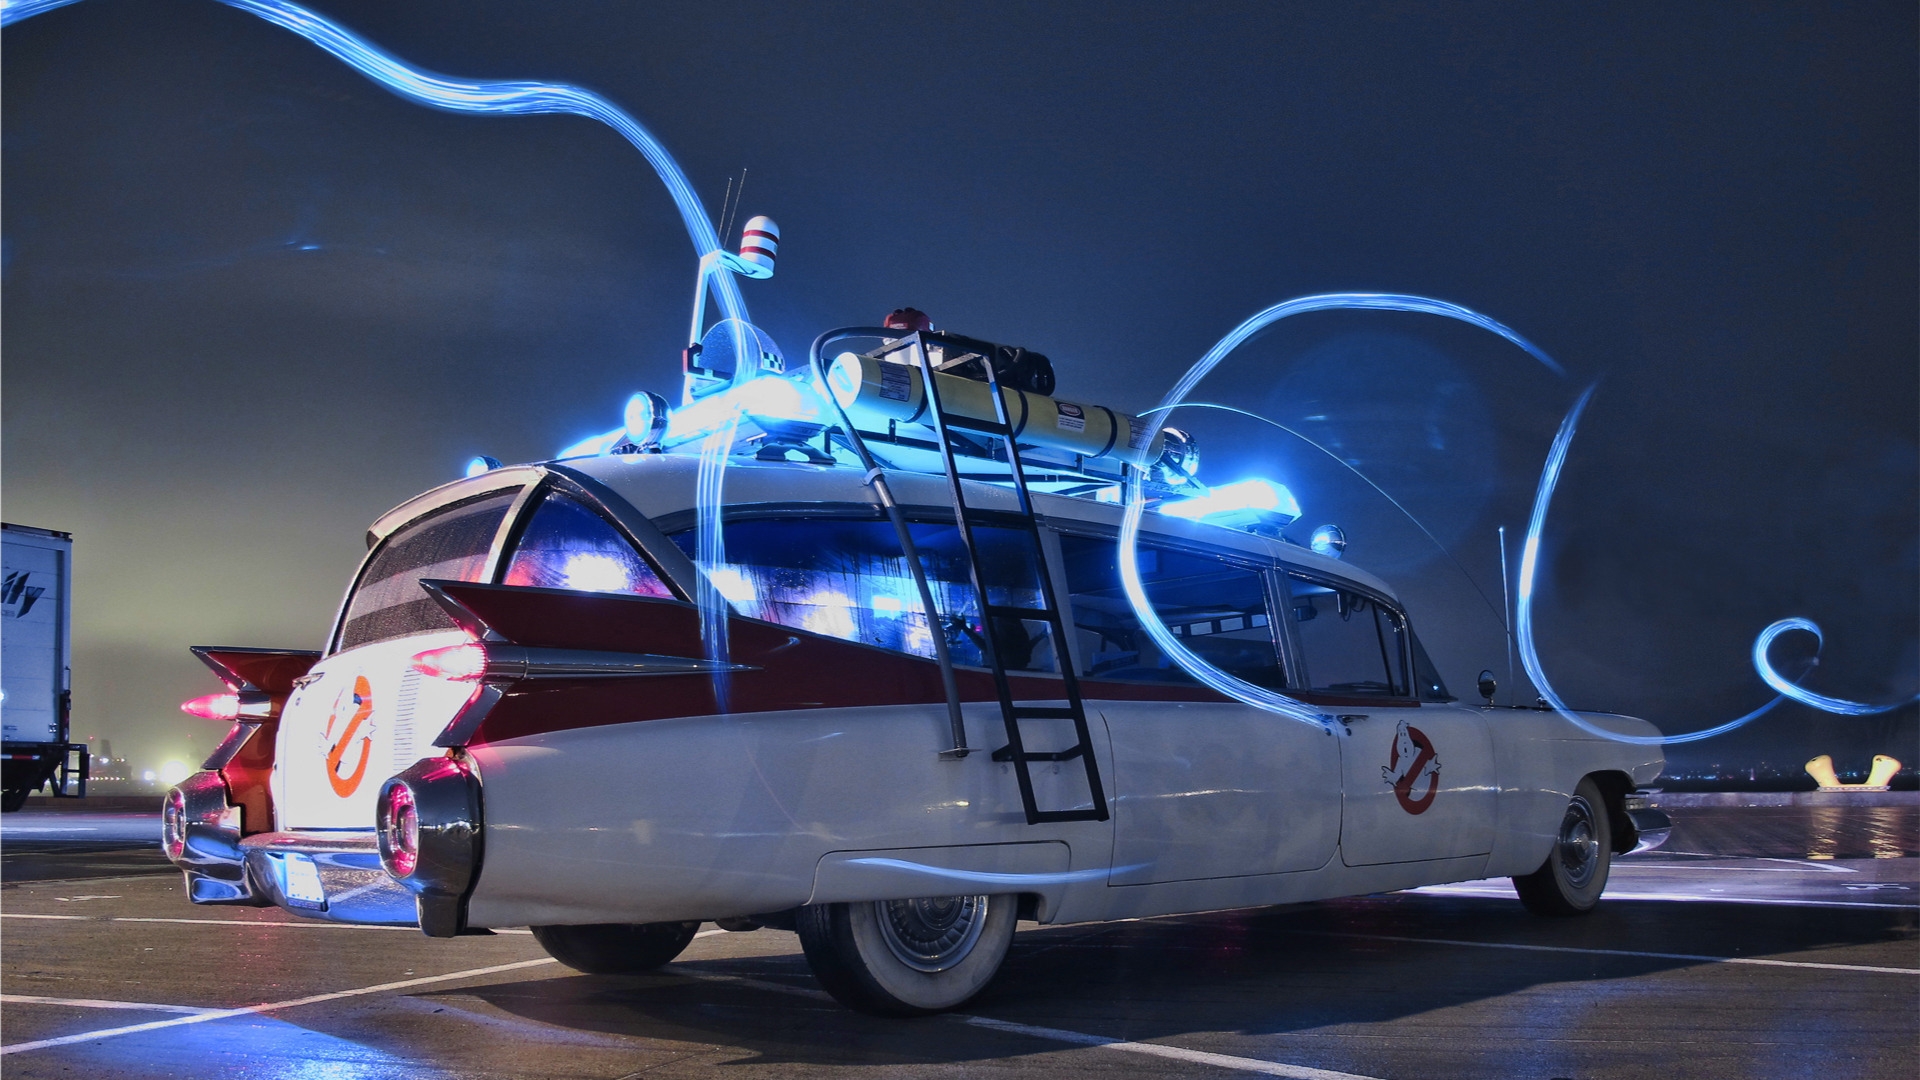 Ghostbusters Car for 1920 x 1080 HDTV 1080p resolution